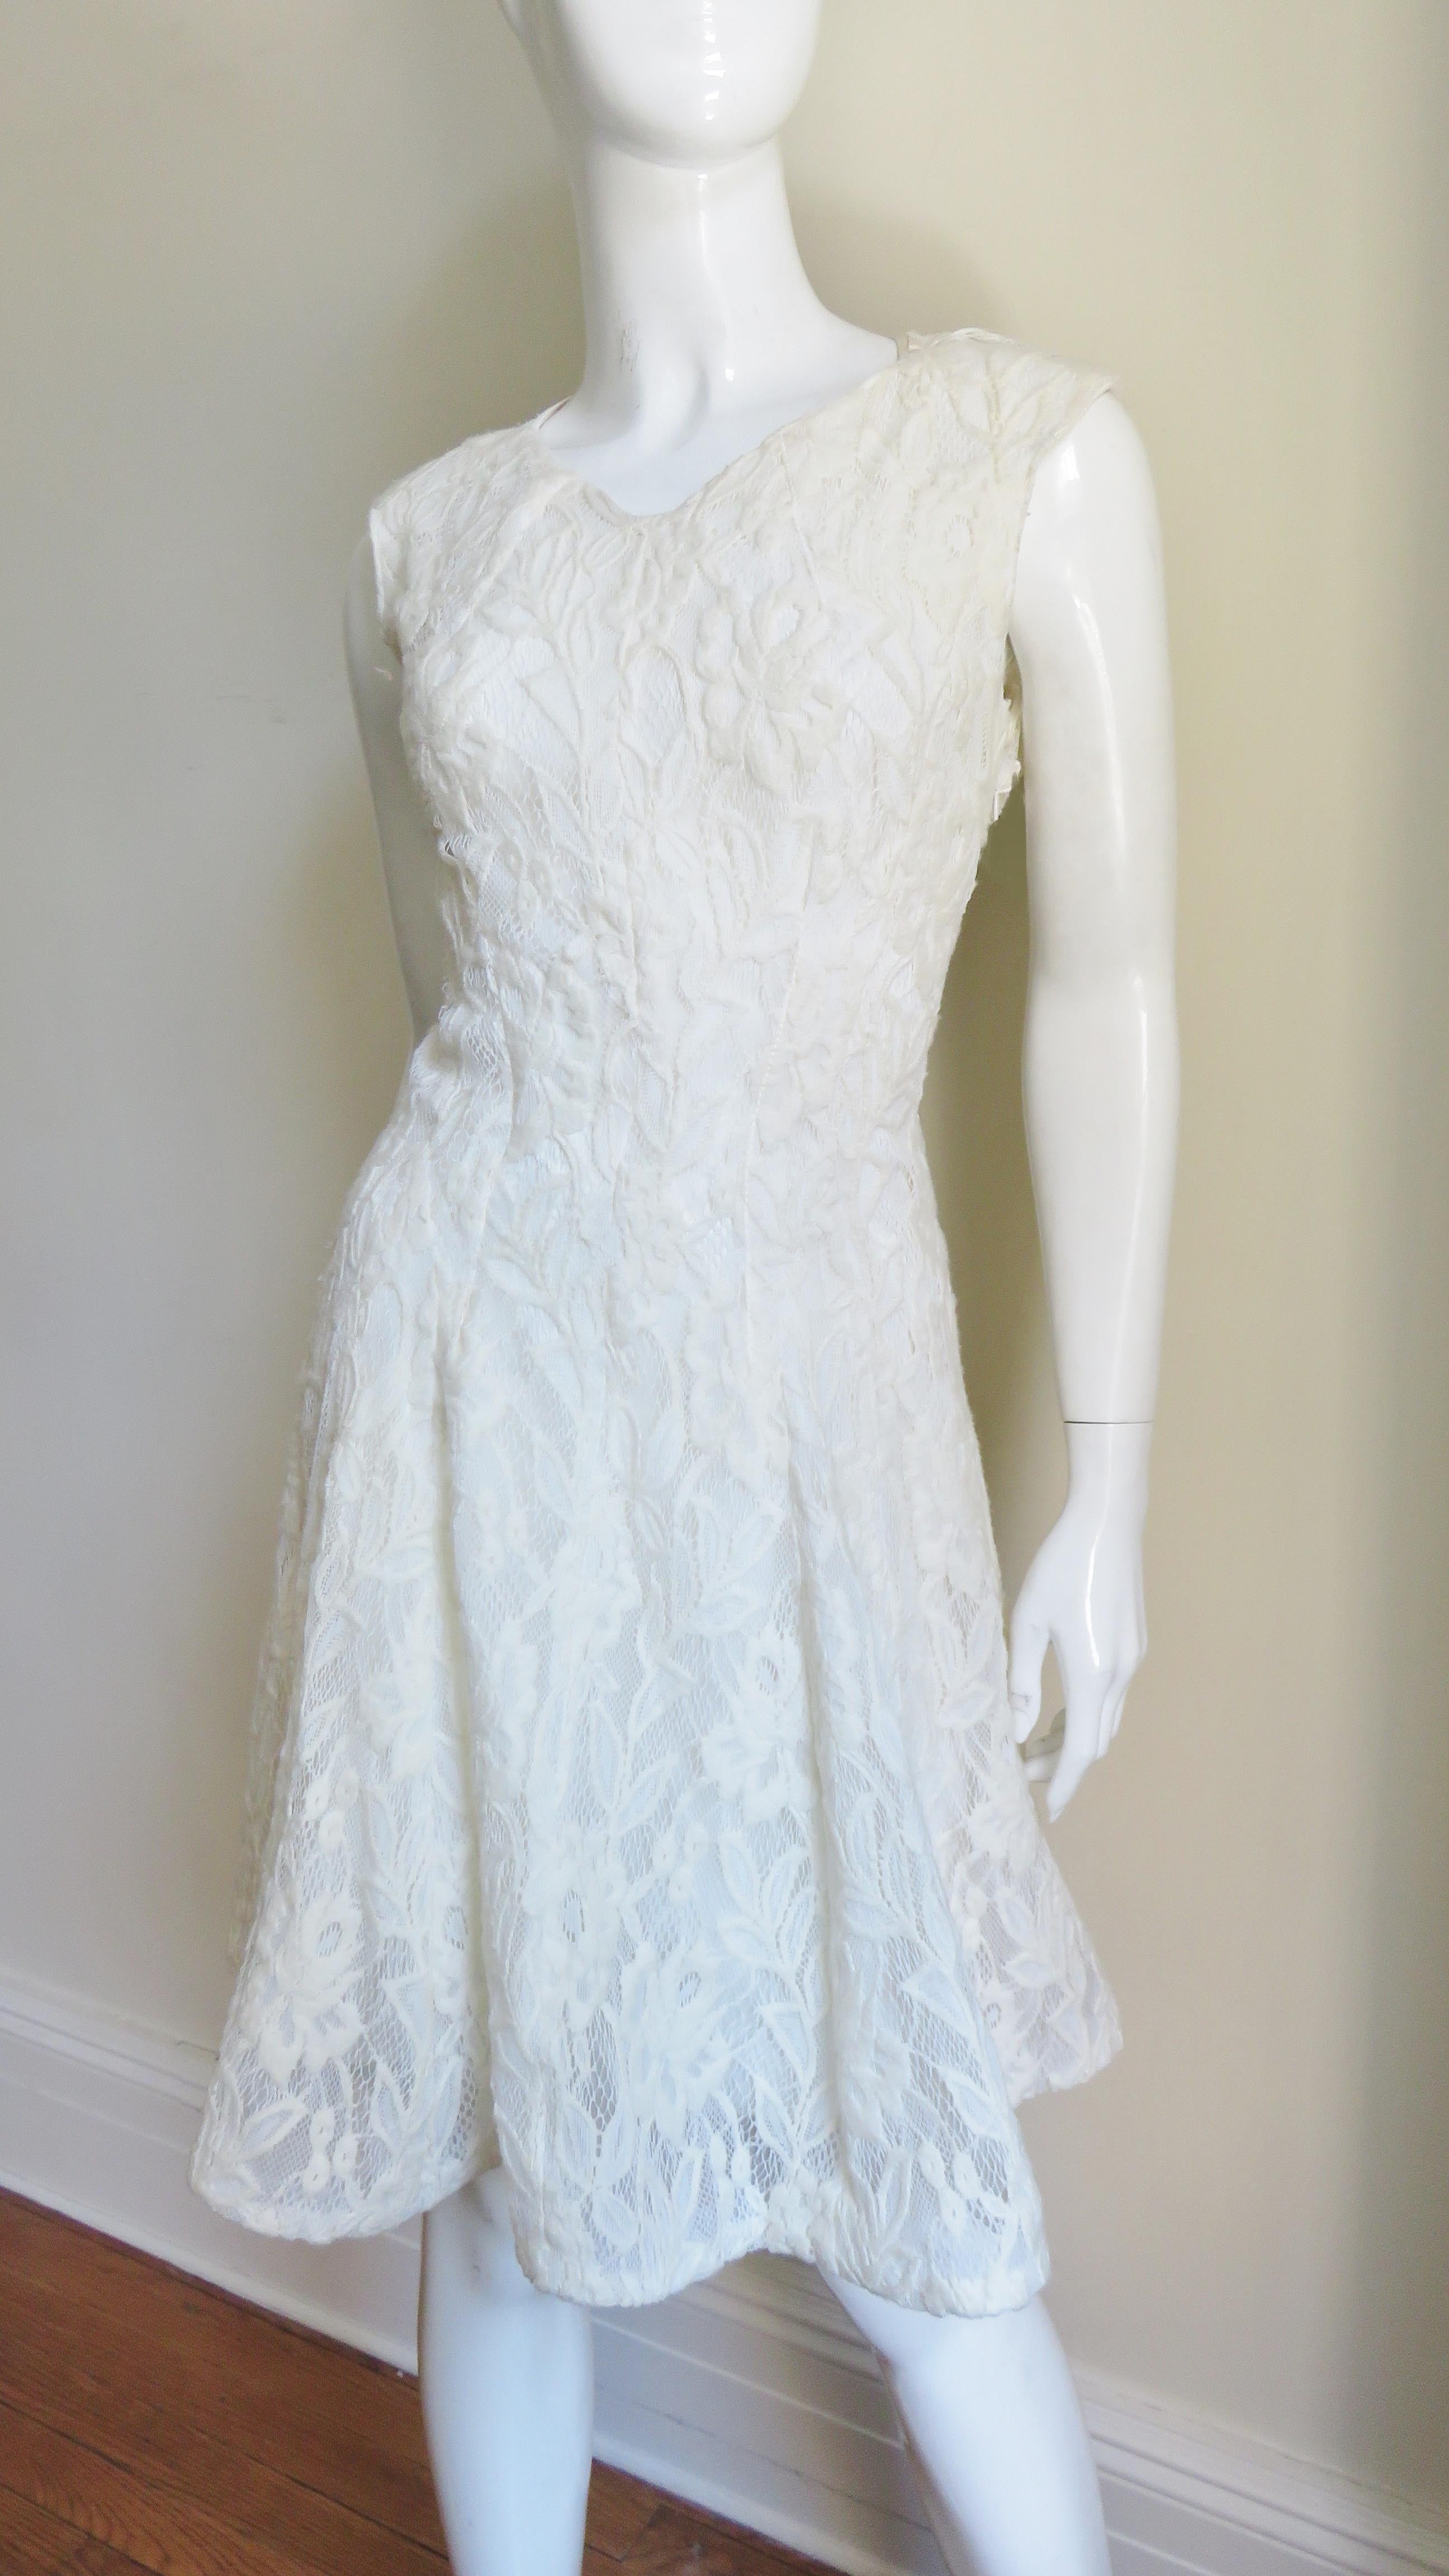 Nina Ricci Lace Dress with Cut out Back For Sale 1